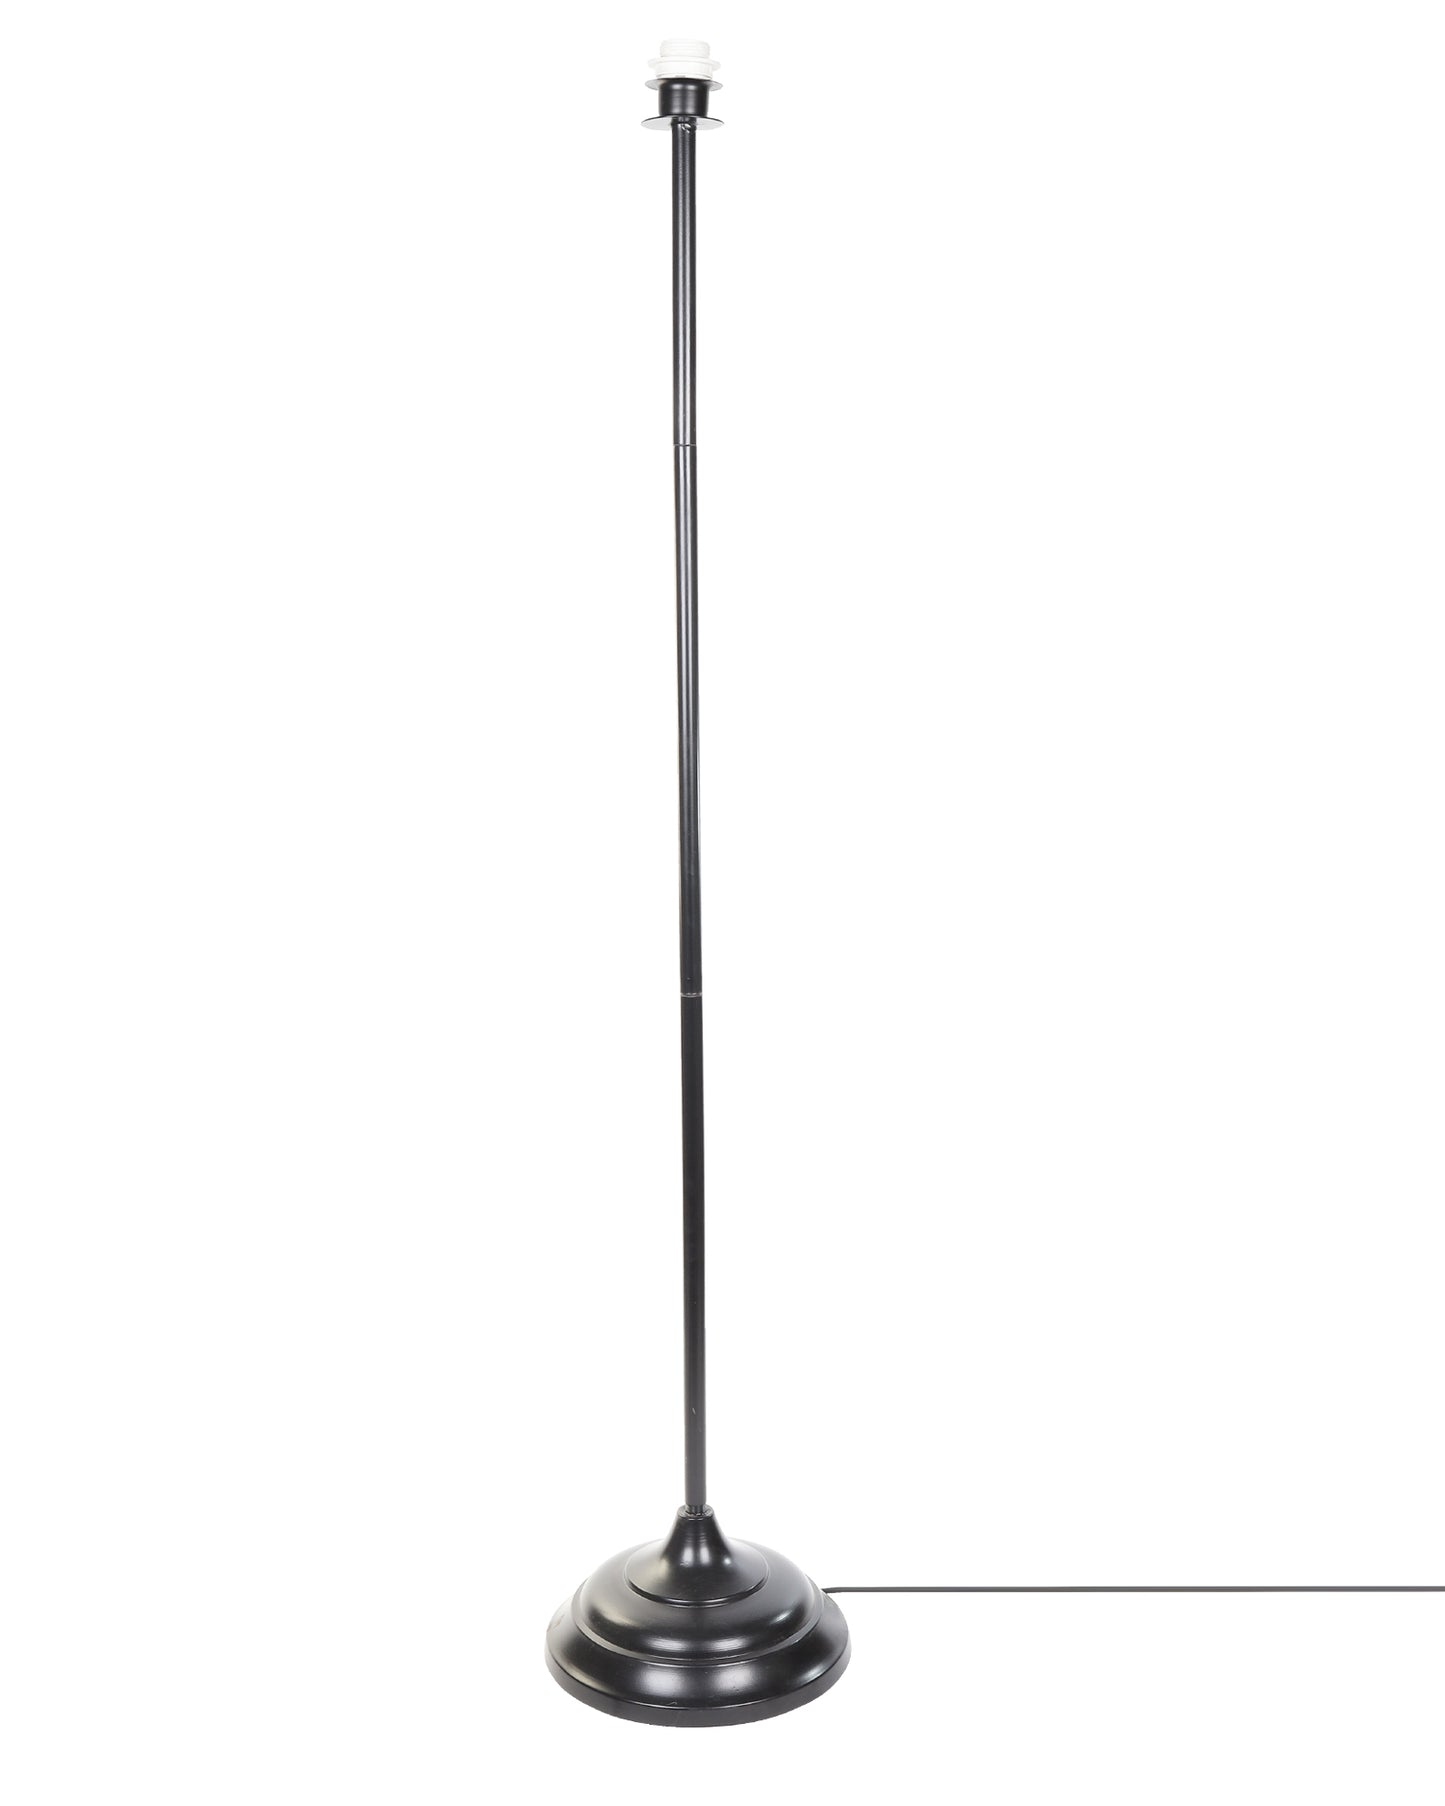 Contemporary Metal Floor Lamp,Contemporary Minimalist Standing Floor Light with Iron Legs,E27 Lamp Base,Modern Design Standing Light for Living Room,Study Room and Bedroom, Straight